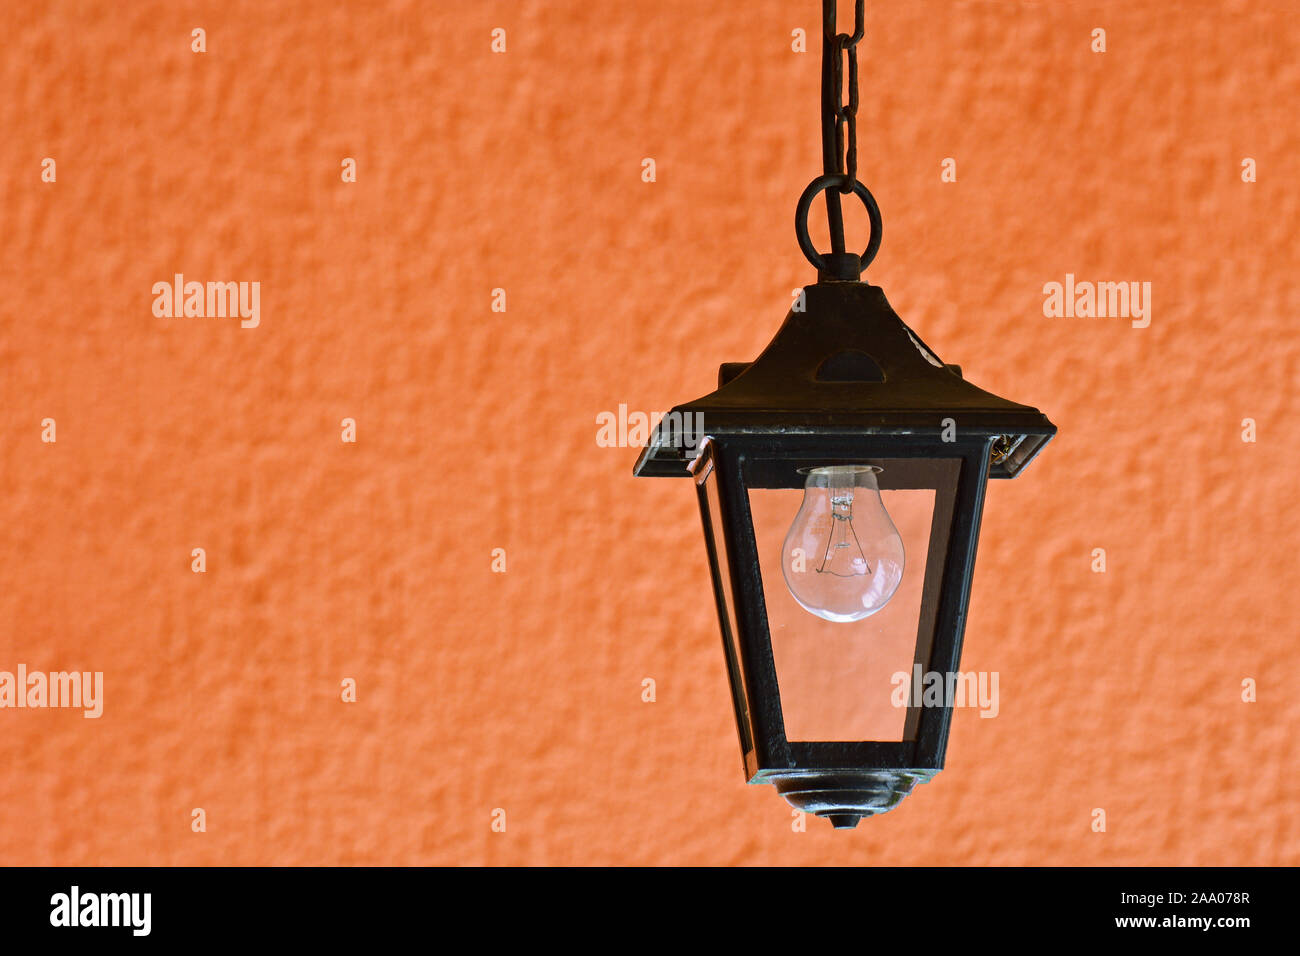 Hanging street lamp in black with an incandescent lamp on the background of the orange wall. Stock Photo